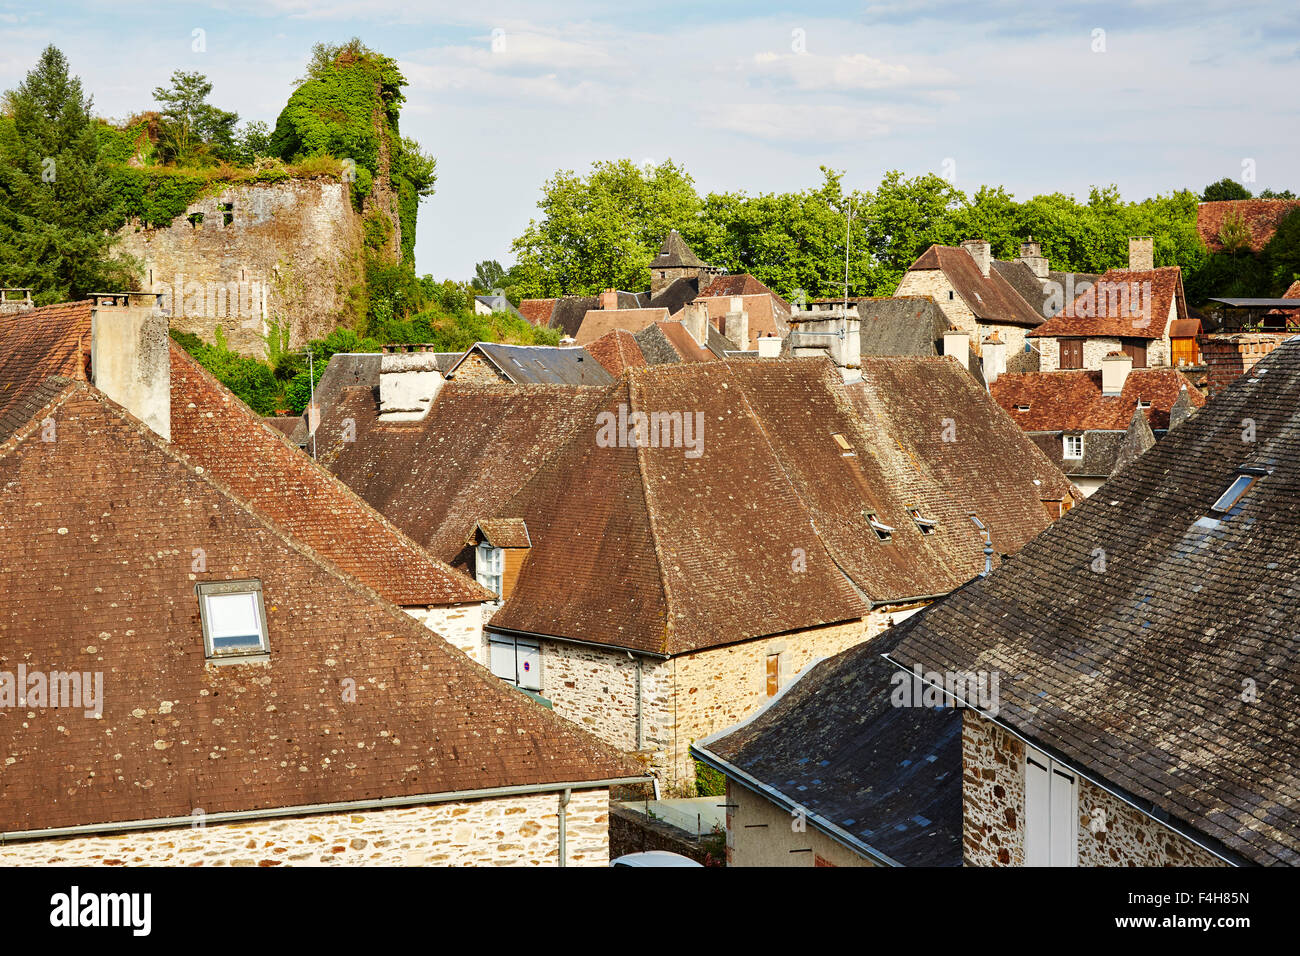 View over the roofs of the village of Segur-le-Chateau, Limousin, Correze, France. Stock Photo